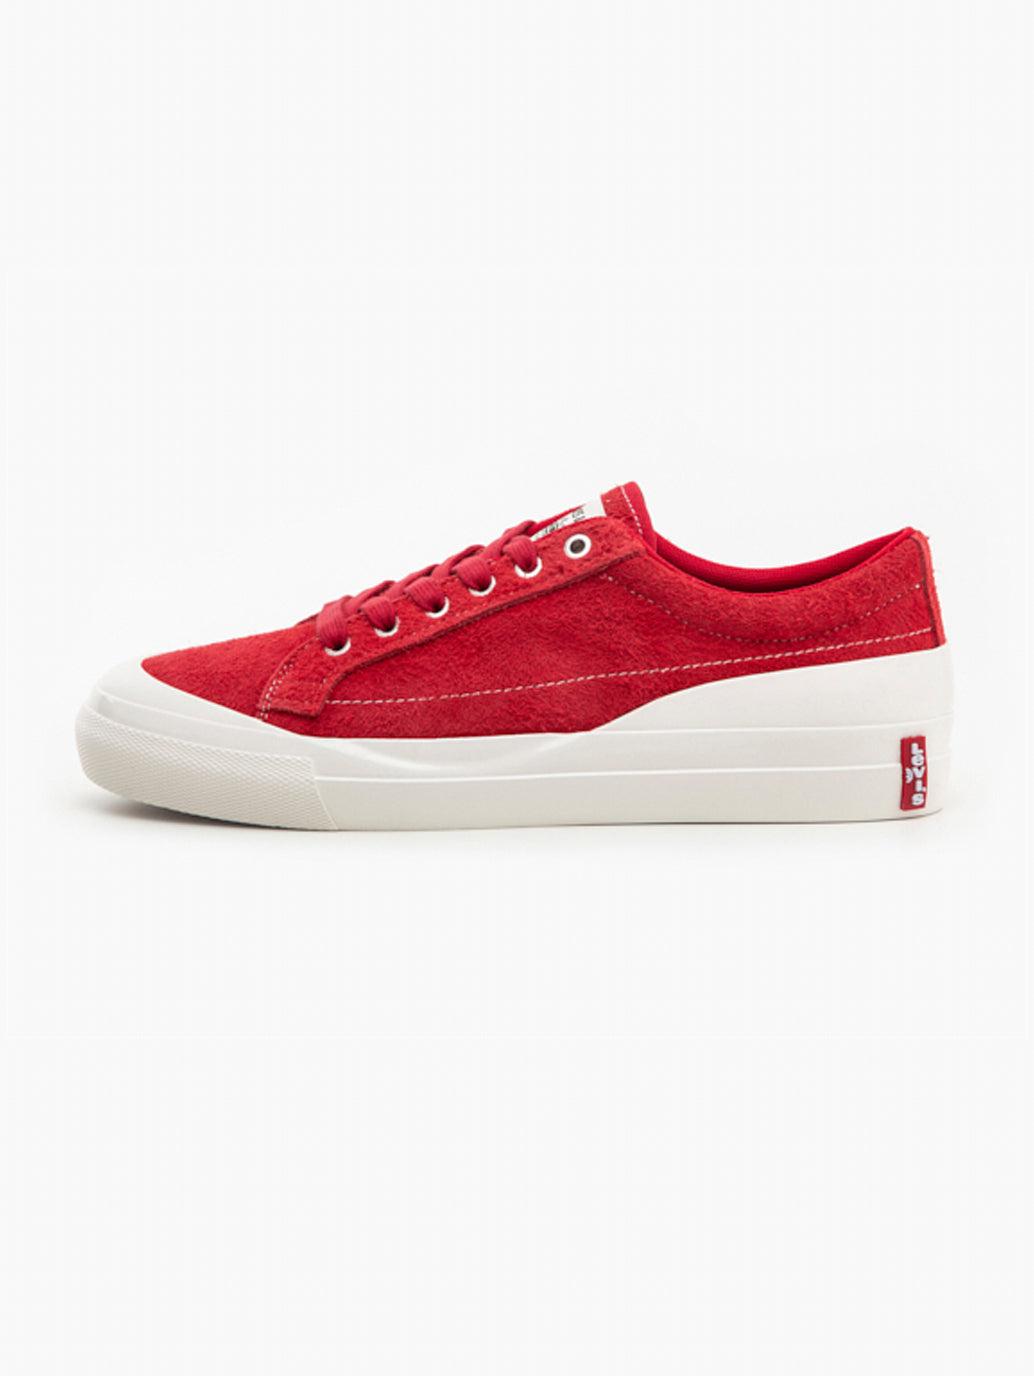 women's-red-casual-sneakers